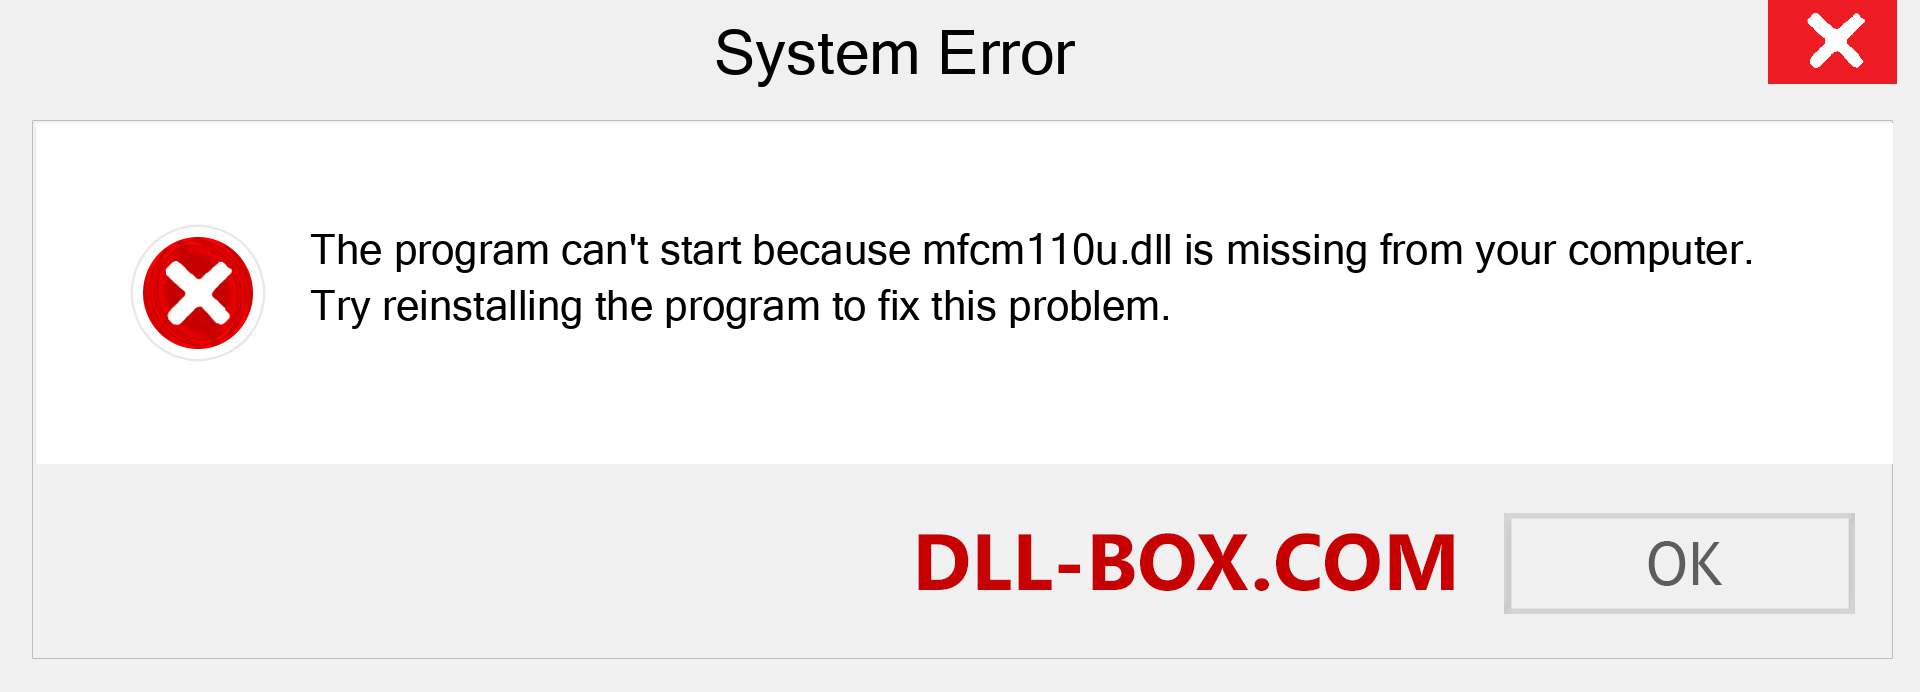  mfcm110u.dll file is missing?. Download for Windows 7, 8, 10 - Fix  mfcm110u dll Missing Error on Windows, photos, images